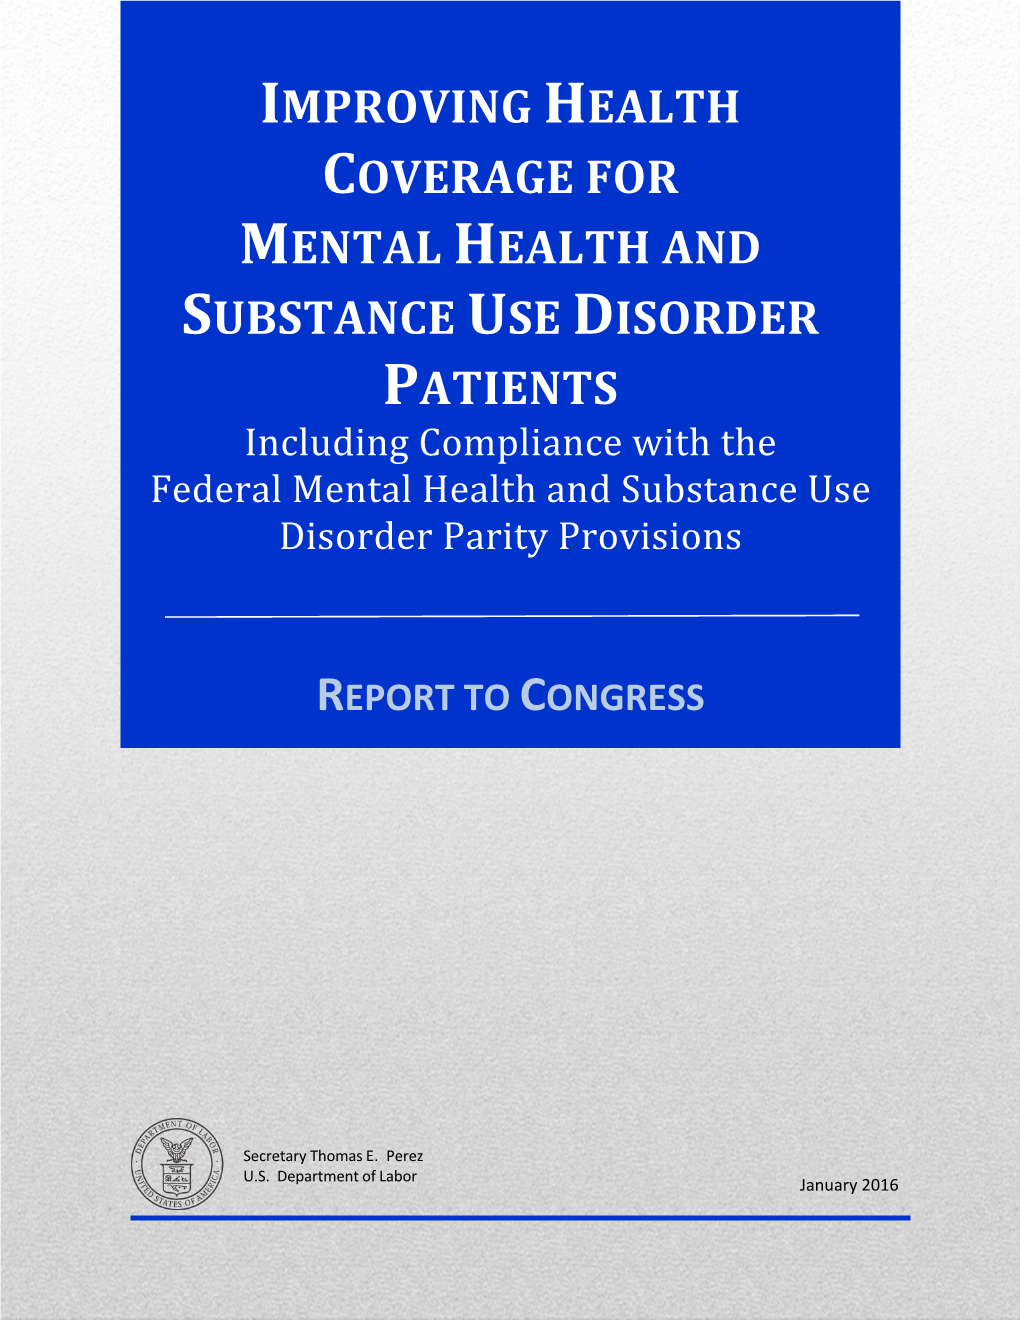 Improving Health Coverage for Mental Health and Substance Use